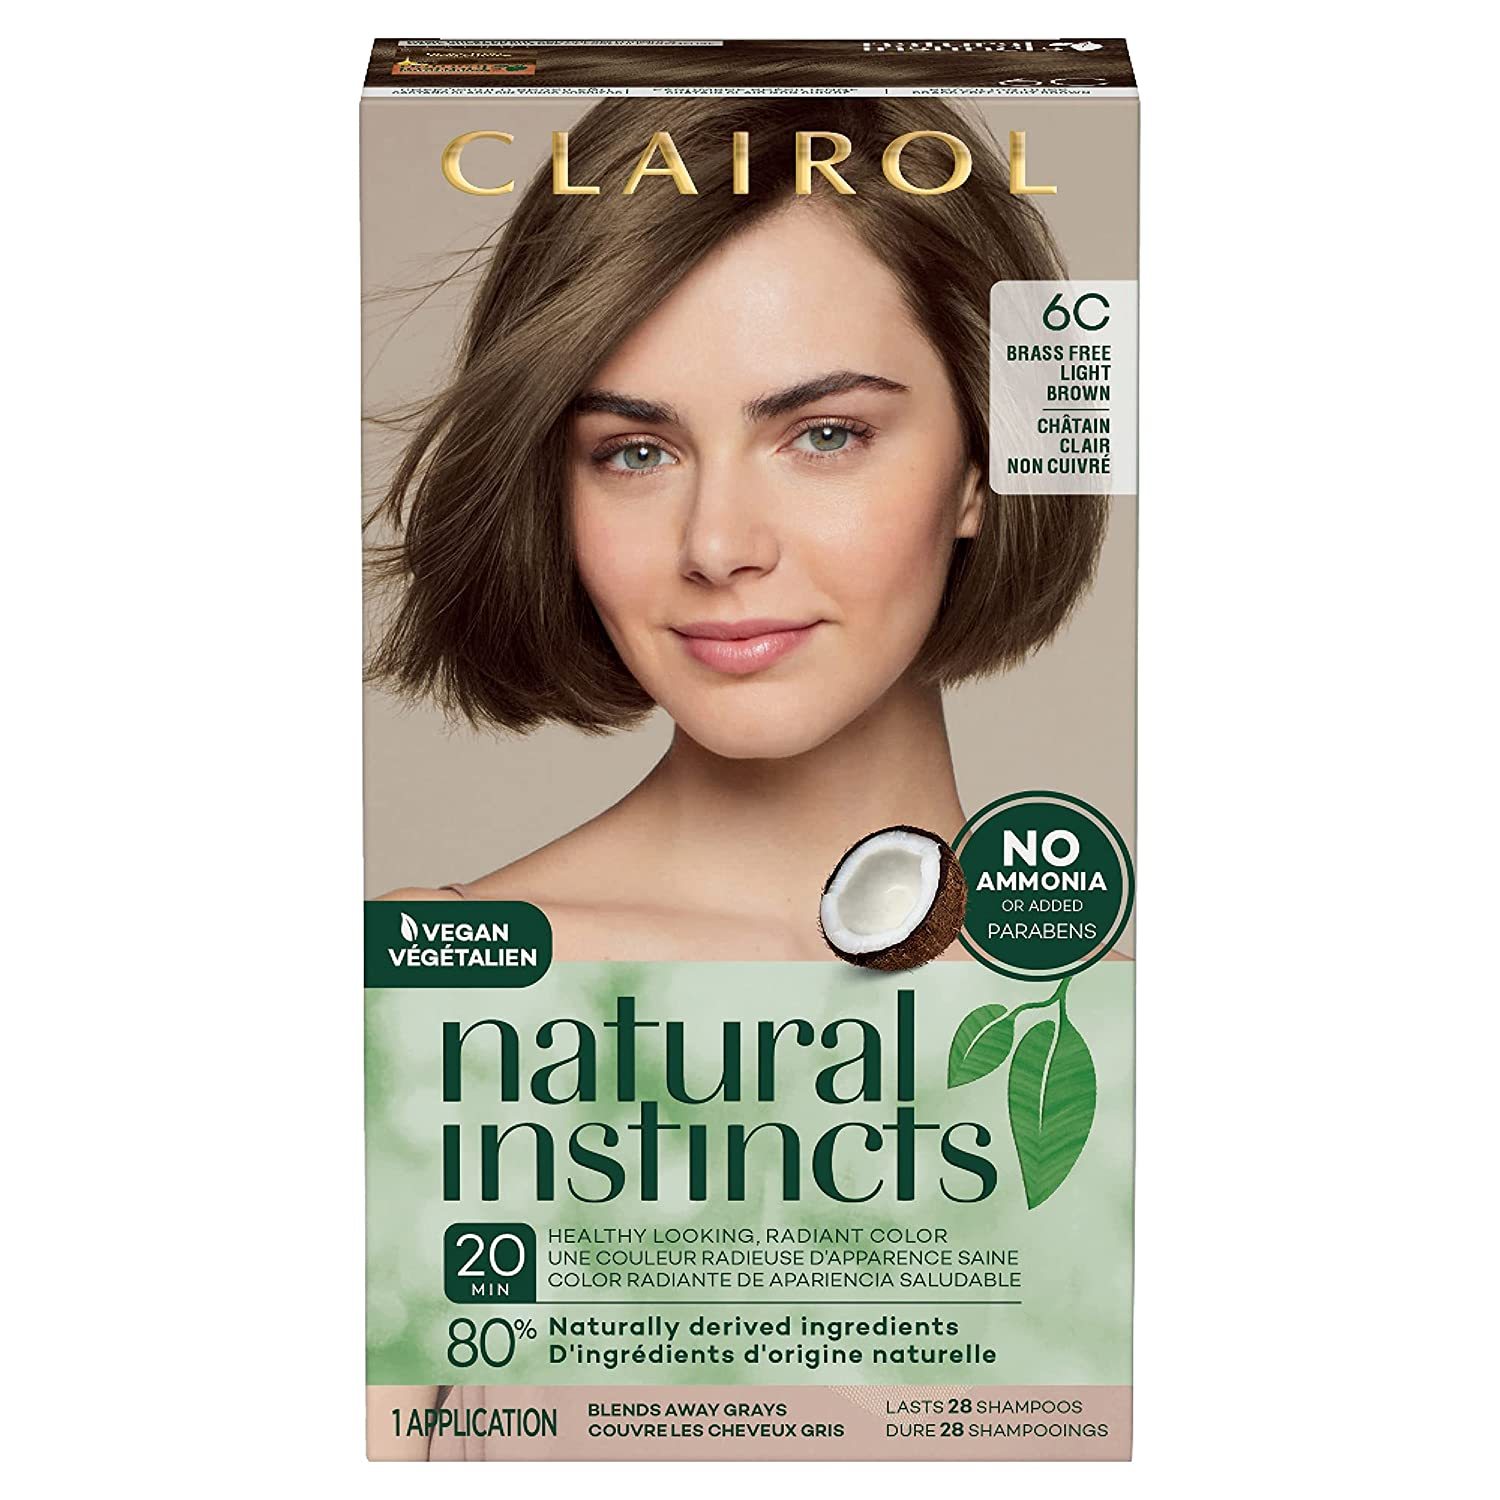 New Clairol Natural Instincts Semi-Permanent Hair Color, 6C Light Brown